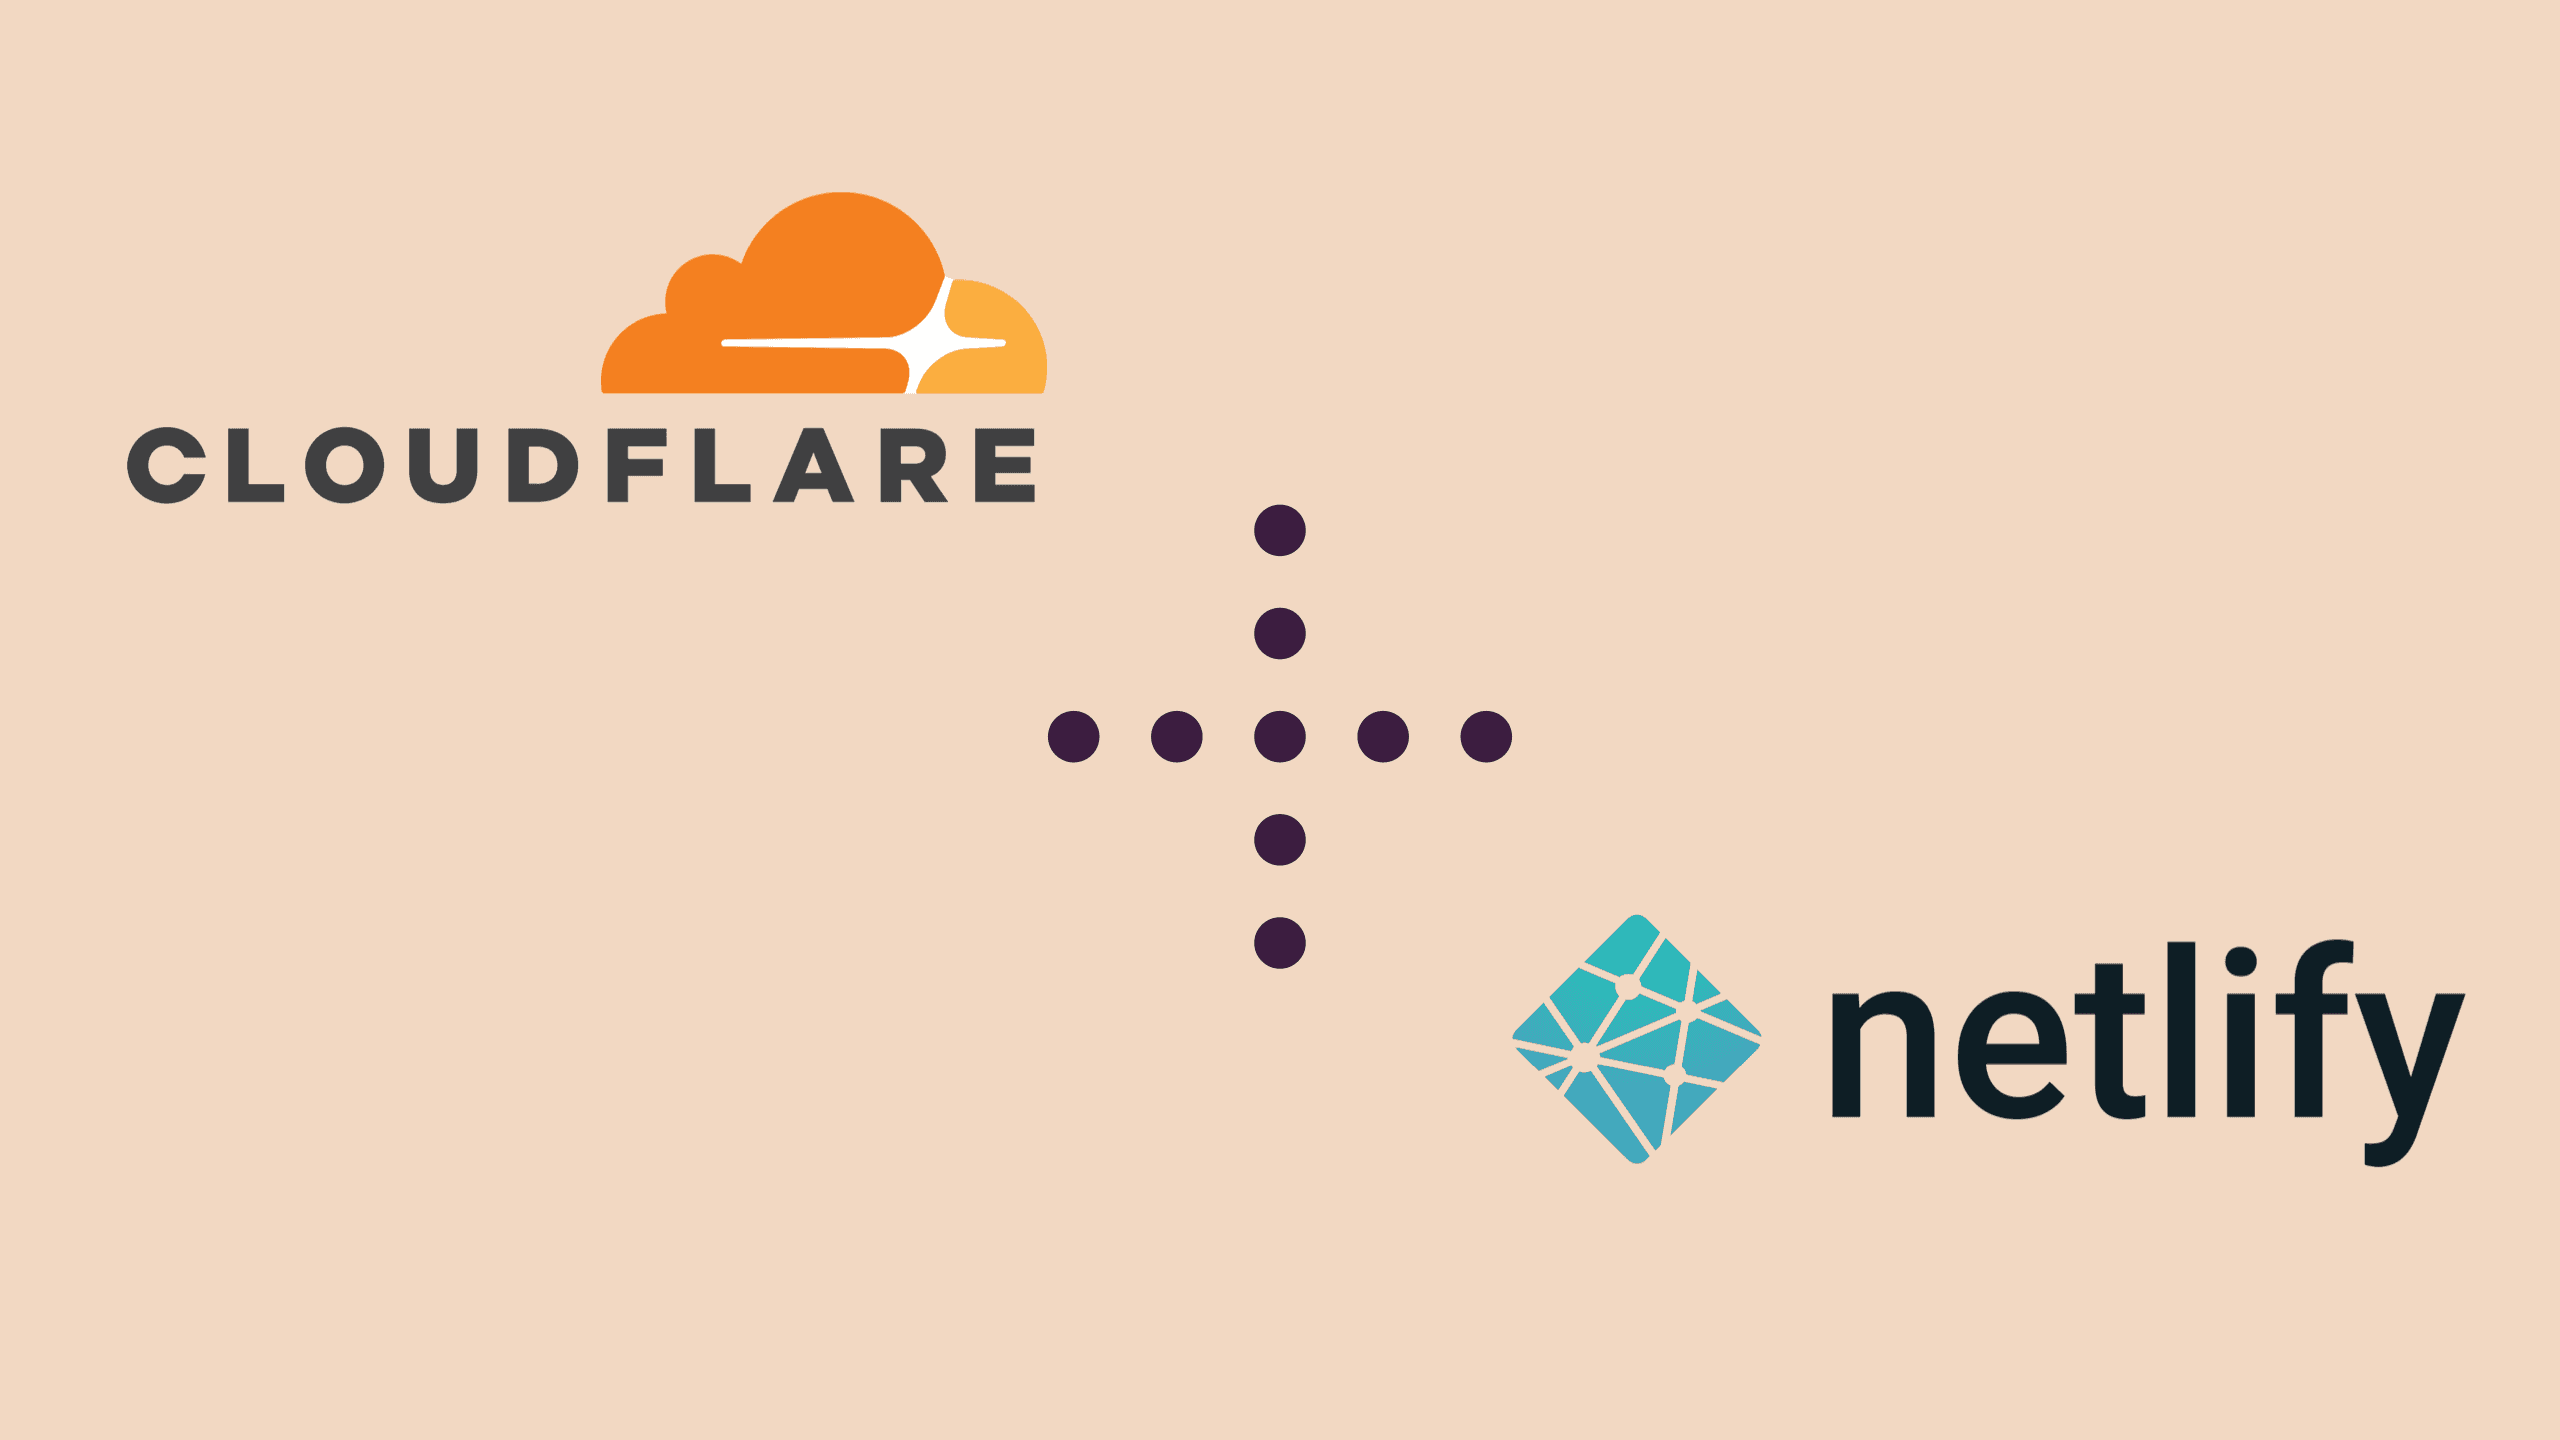 Save Netlify bandwidth by caching assets on Cloudflare featured image